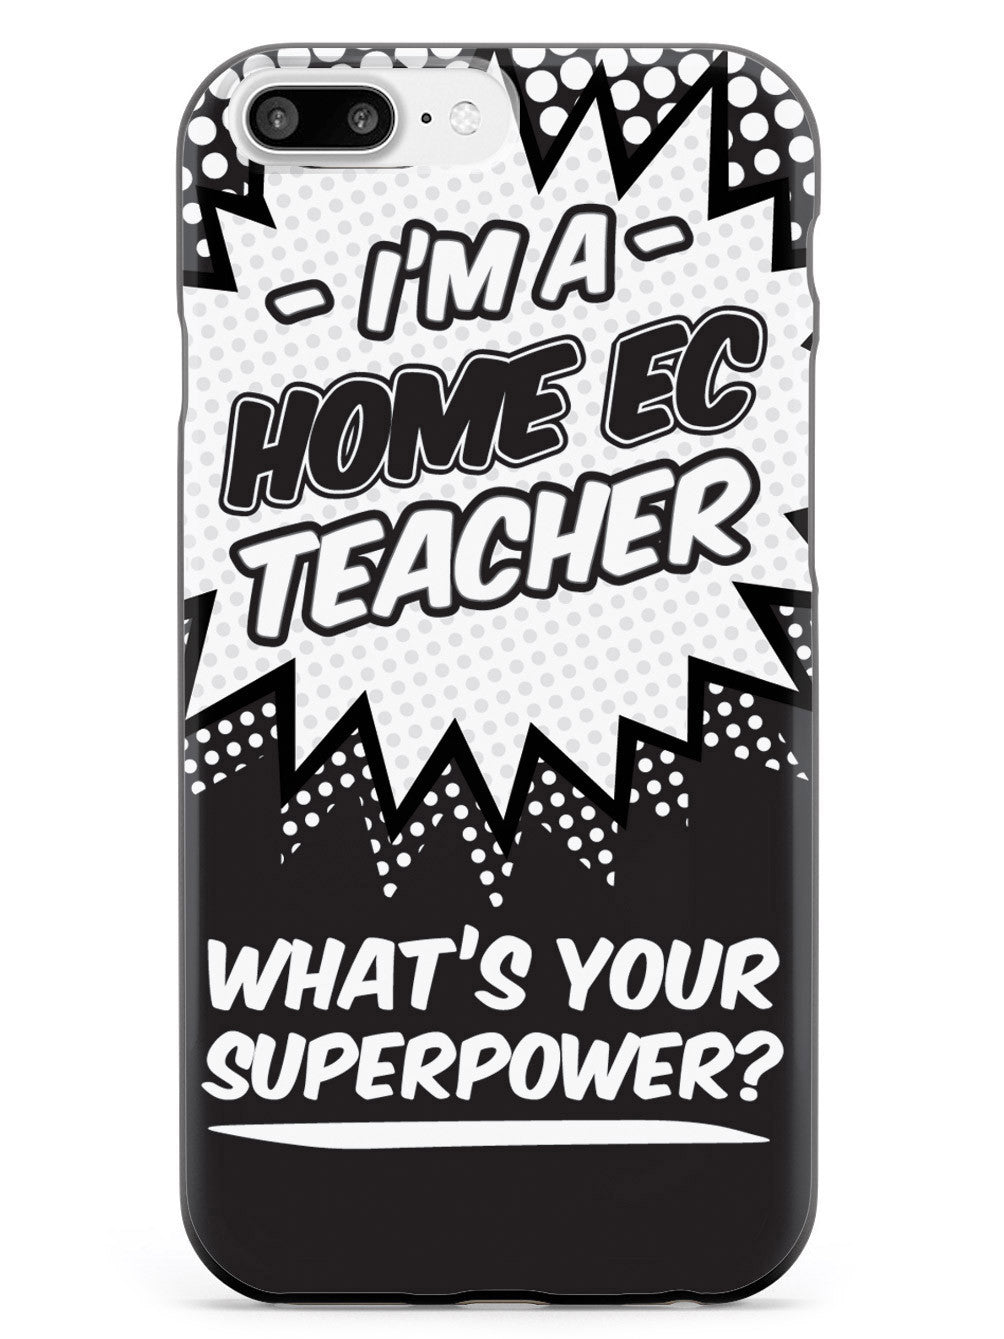 Home Ec Teacher - What's Your Superpower? Case